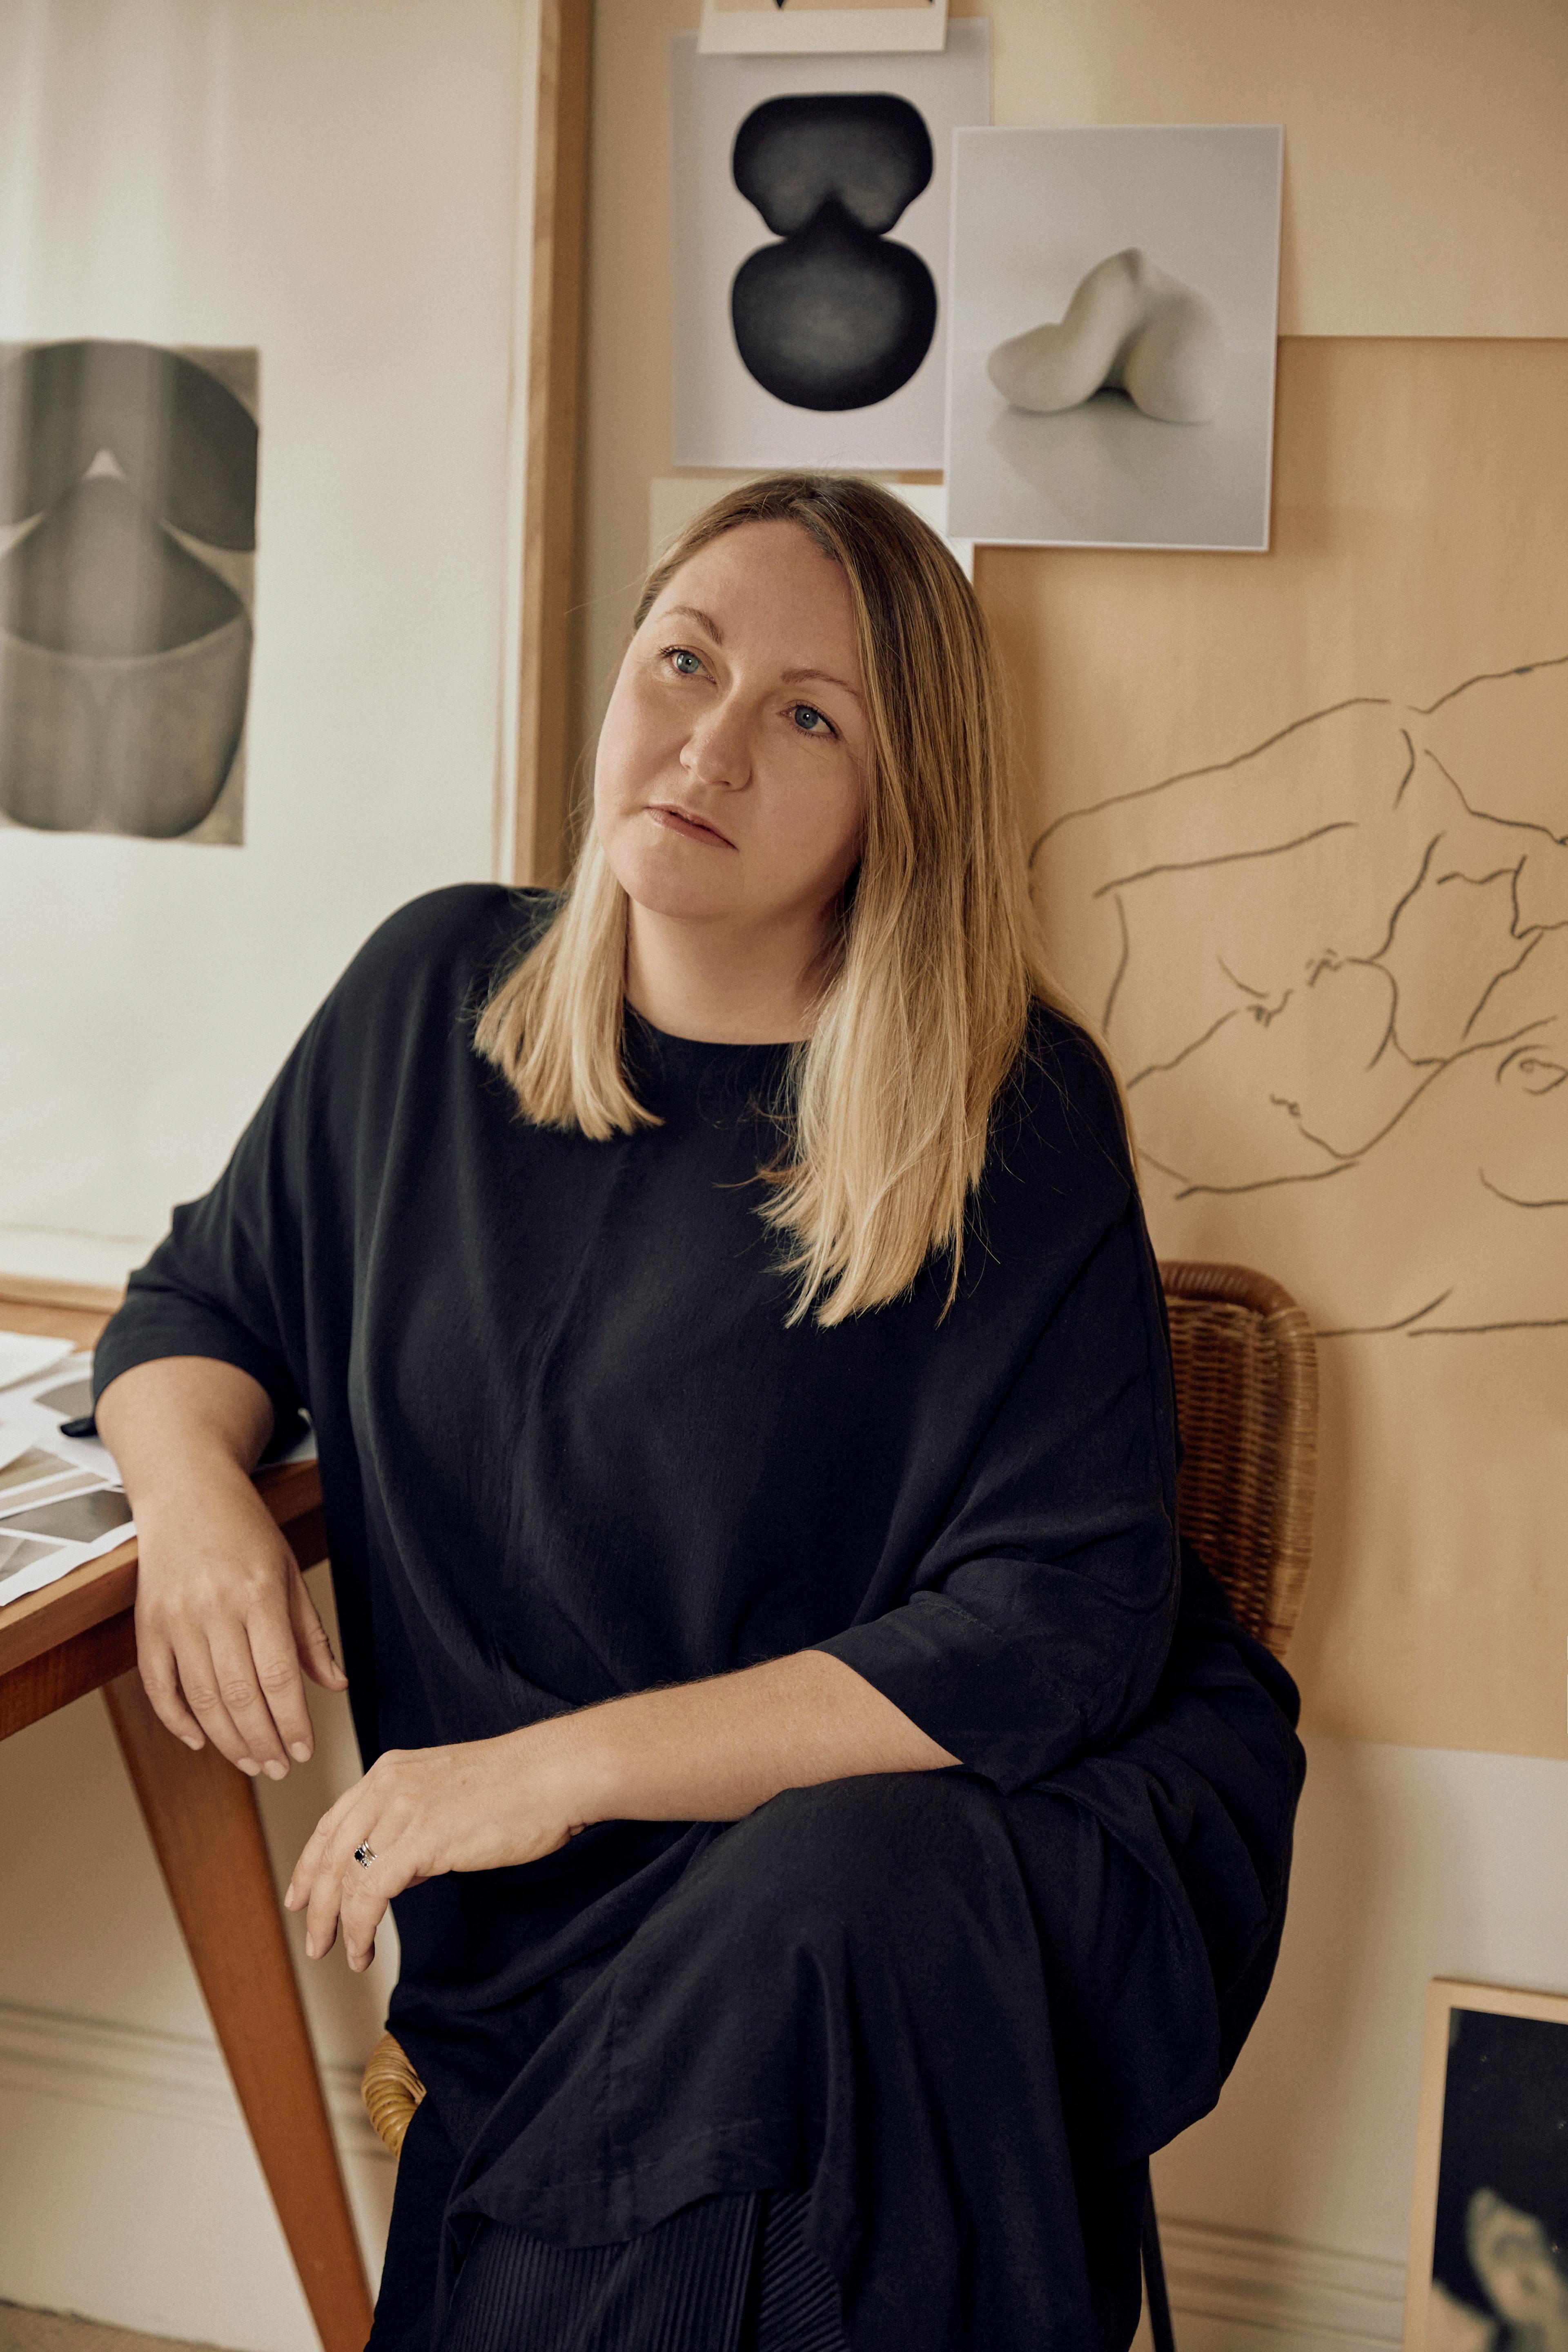 Artist Caroline Walls, dressed in all black, sits on a chair at her studio and looks off into the distance.